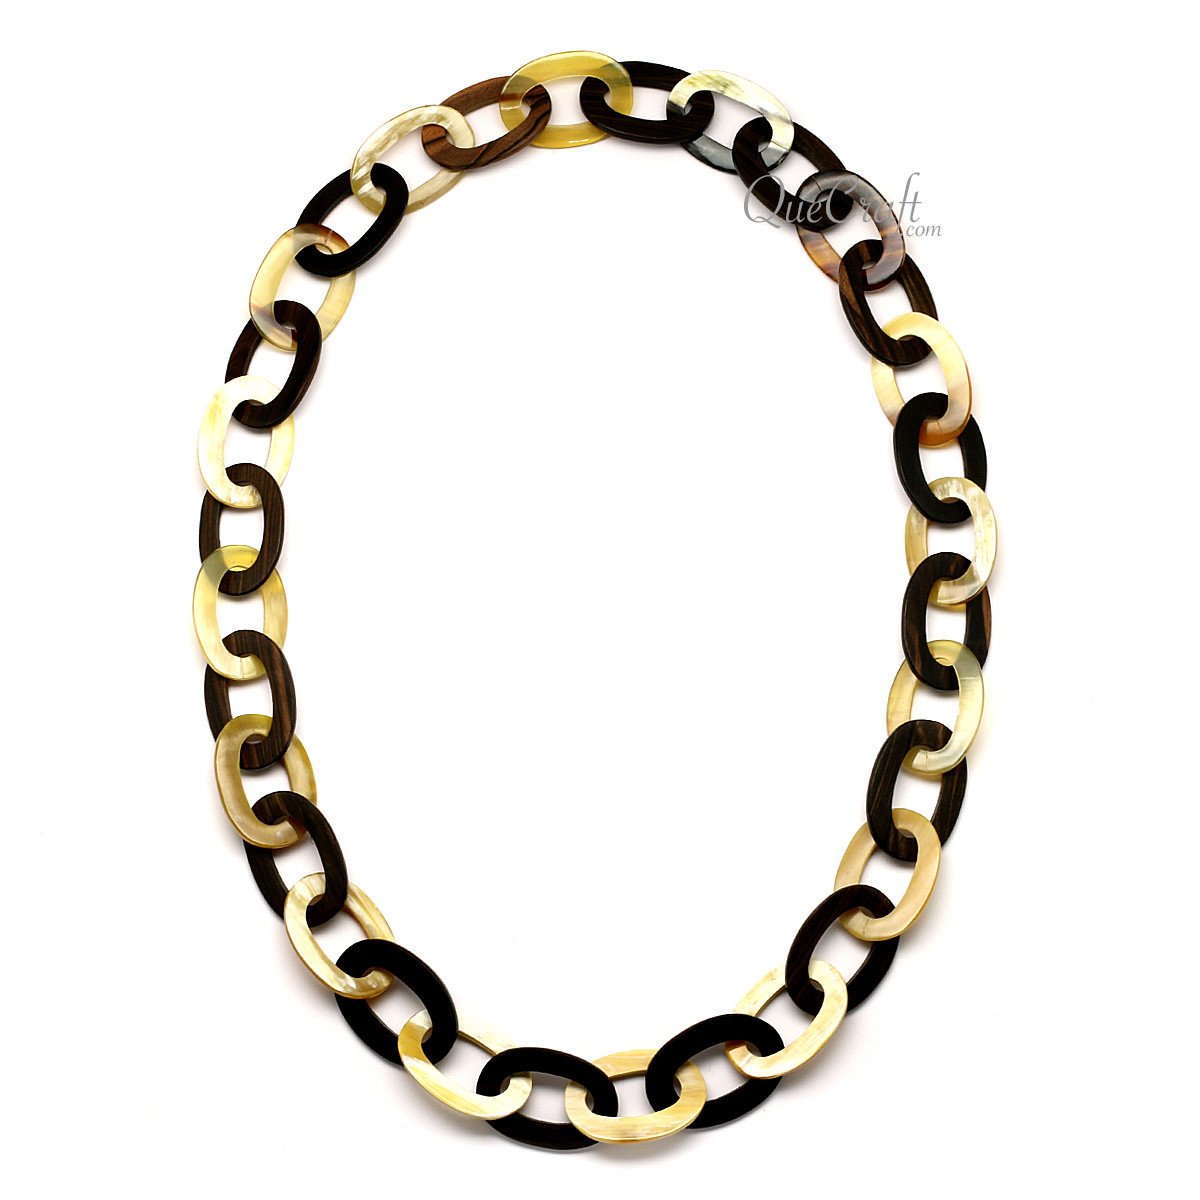 Ebony & Horn Chain Necklace #12397 - HORN JEWELRY